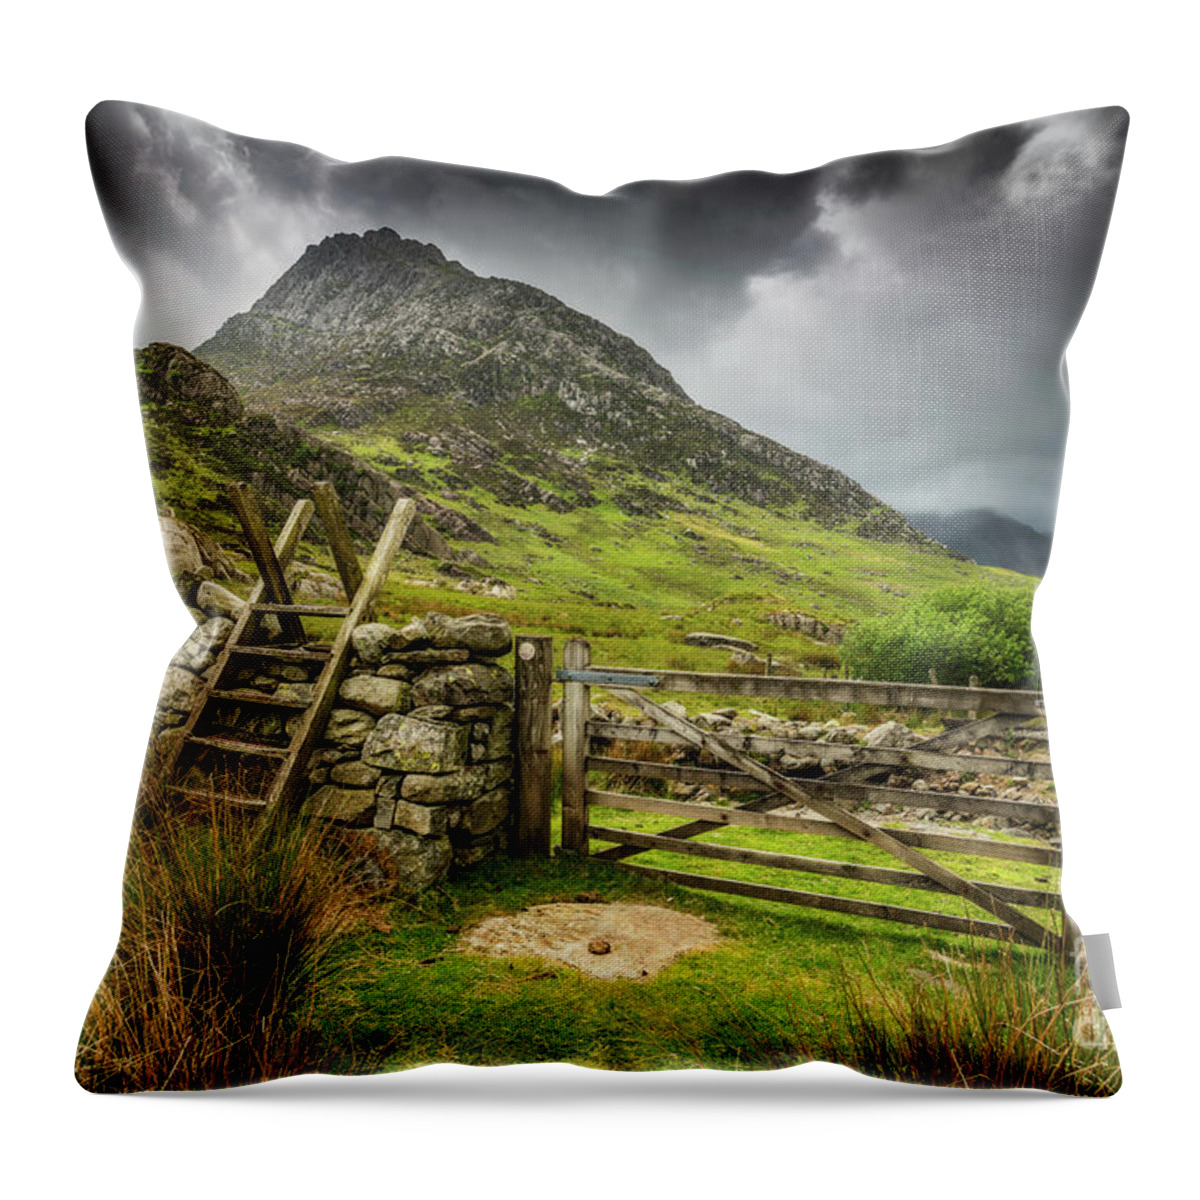 Tryfan Mountain Throw Pillow featuring the photograph Way To Tryfan Mountain by Adrian Evans